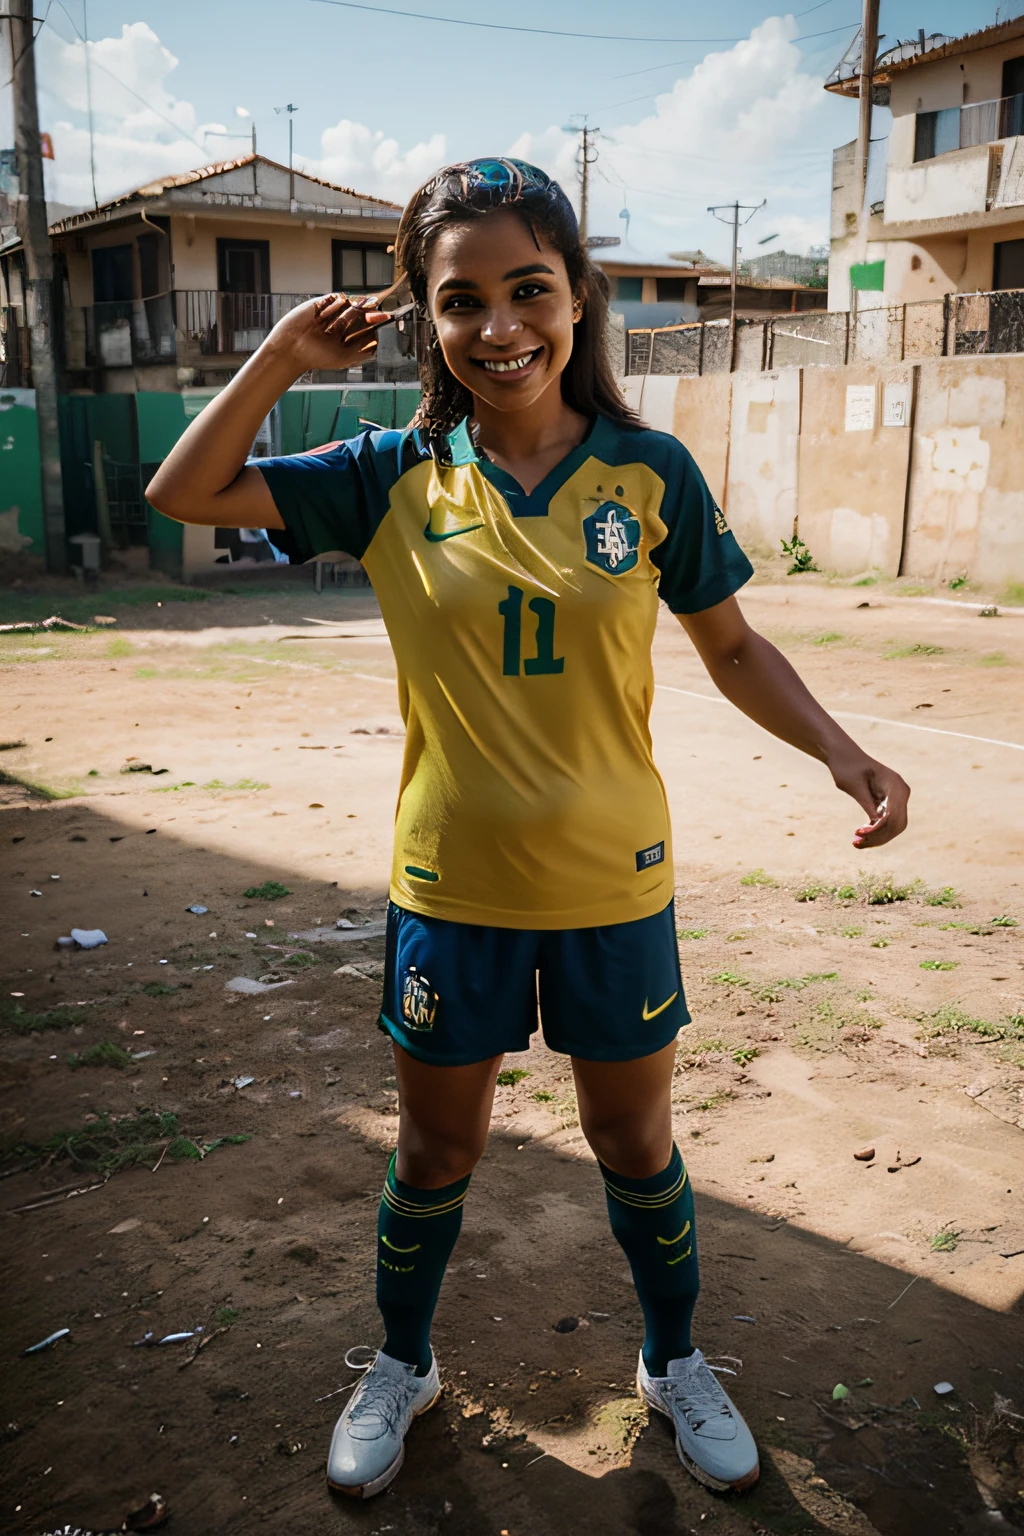 Corrija detalhes do rosto, enhancing the smile and correcting the look. correct the uniform by correctly applying the emblem of the Brazilian team.